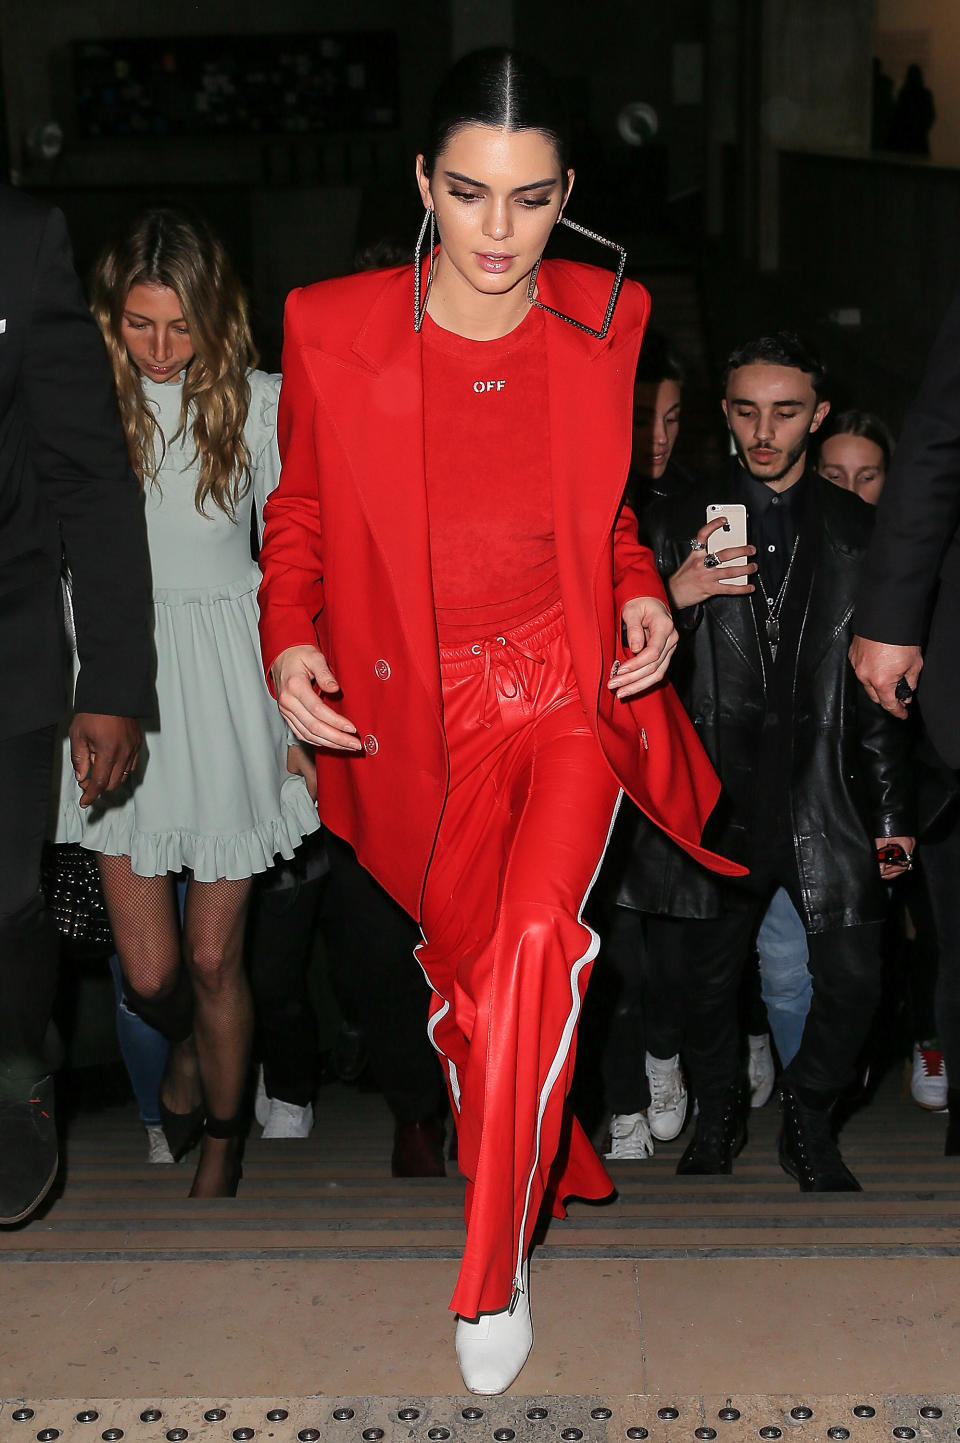 Kendall Jenner making her way to the Off-White show at Paris Fashion Week in March 2017. 